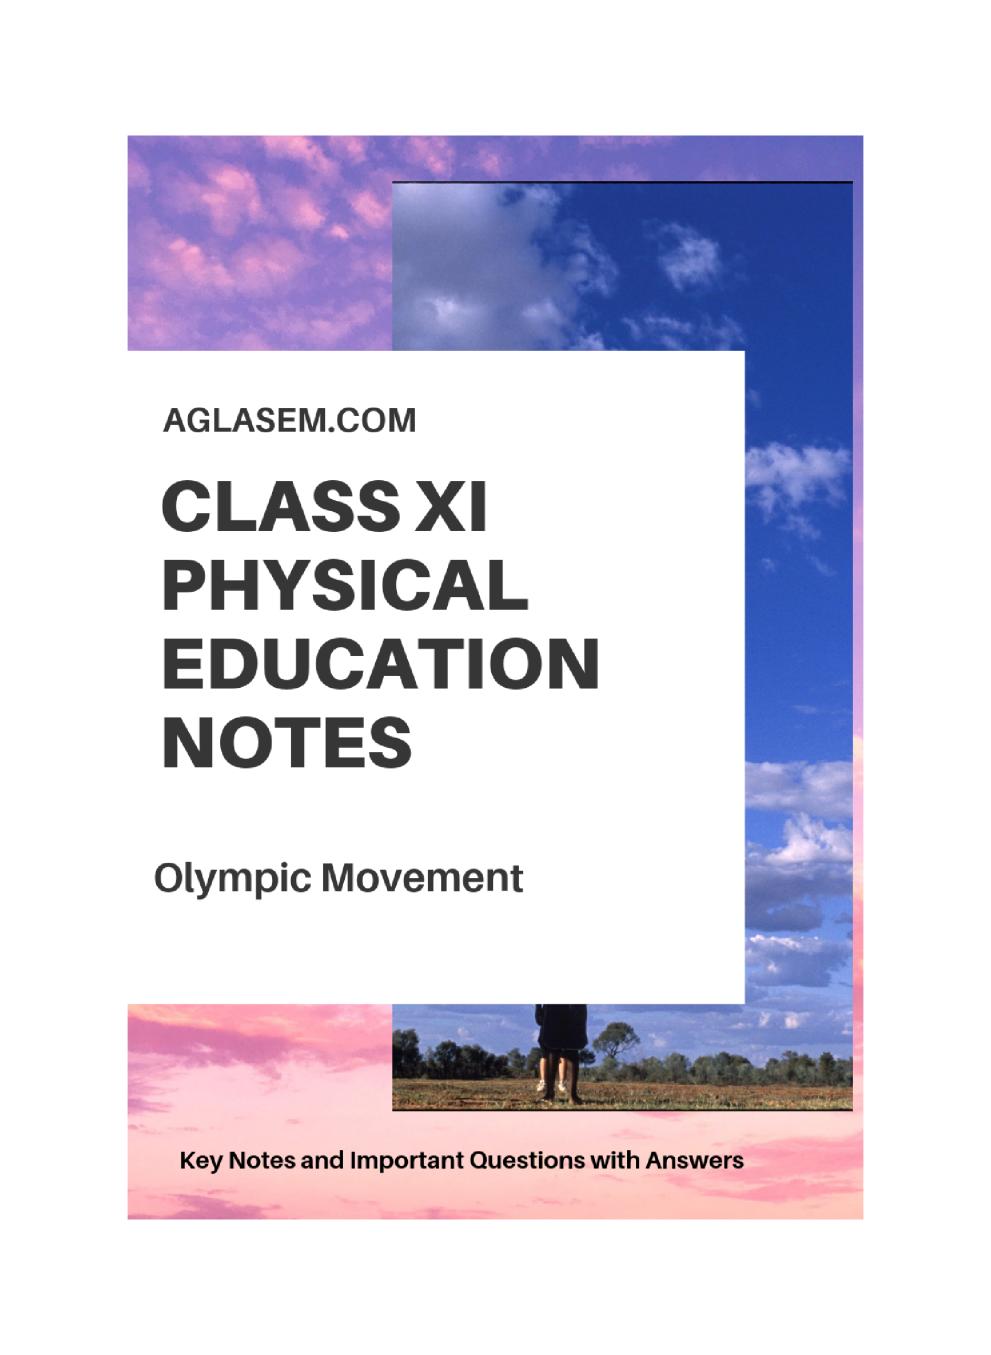 Class 11 Physical Education Notes for Olympic Movement - Page 1